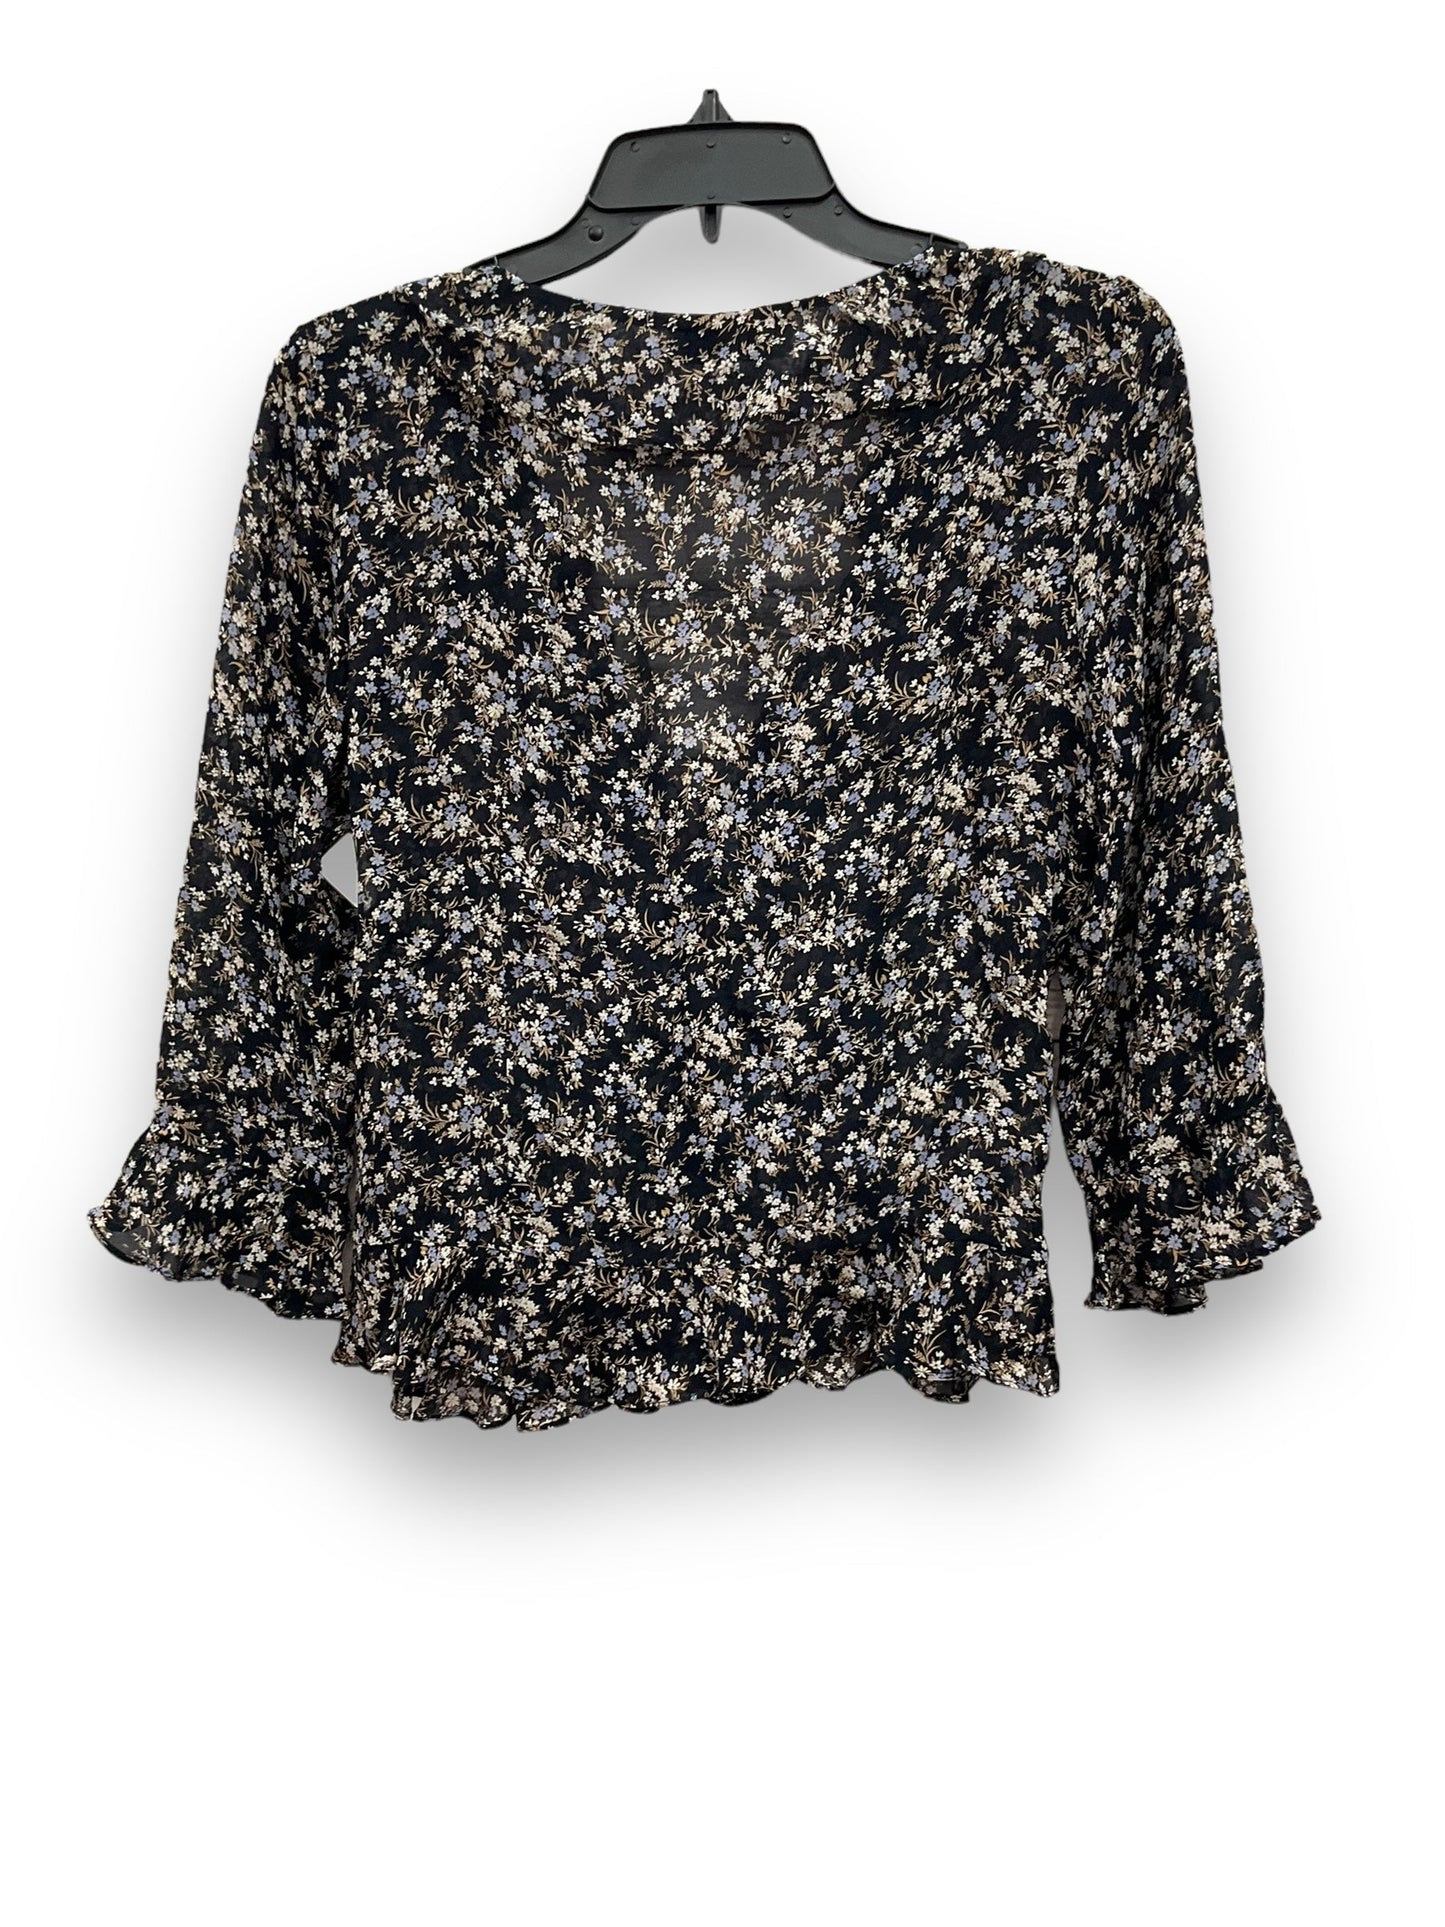 Floral Print Blouse 3/4 Sleeve Bailey 44, Size S